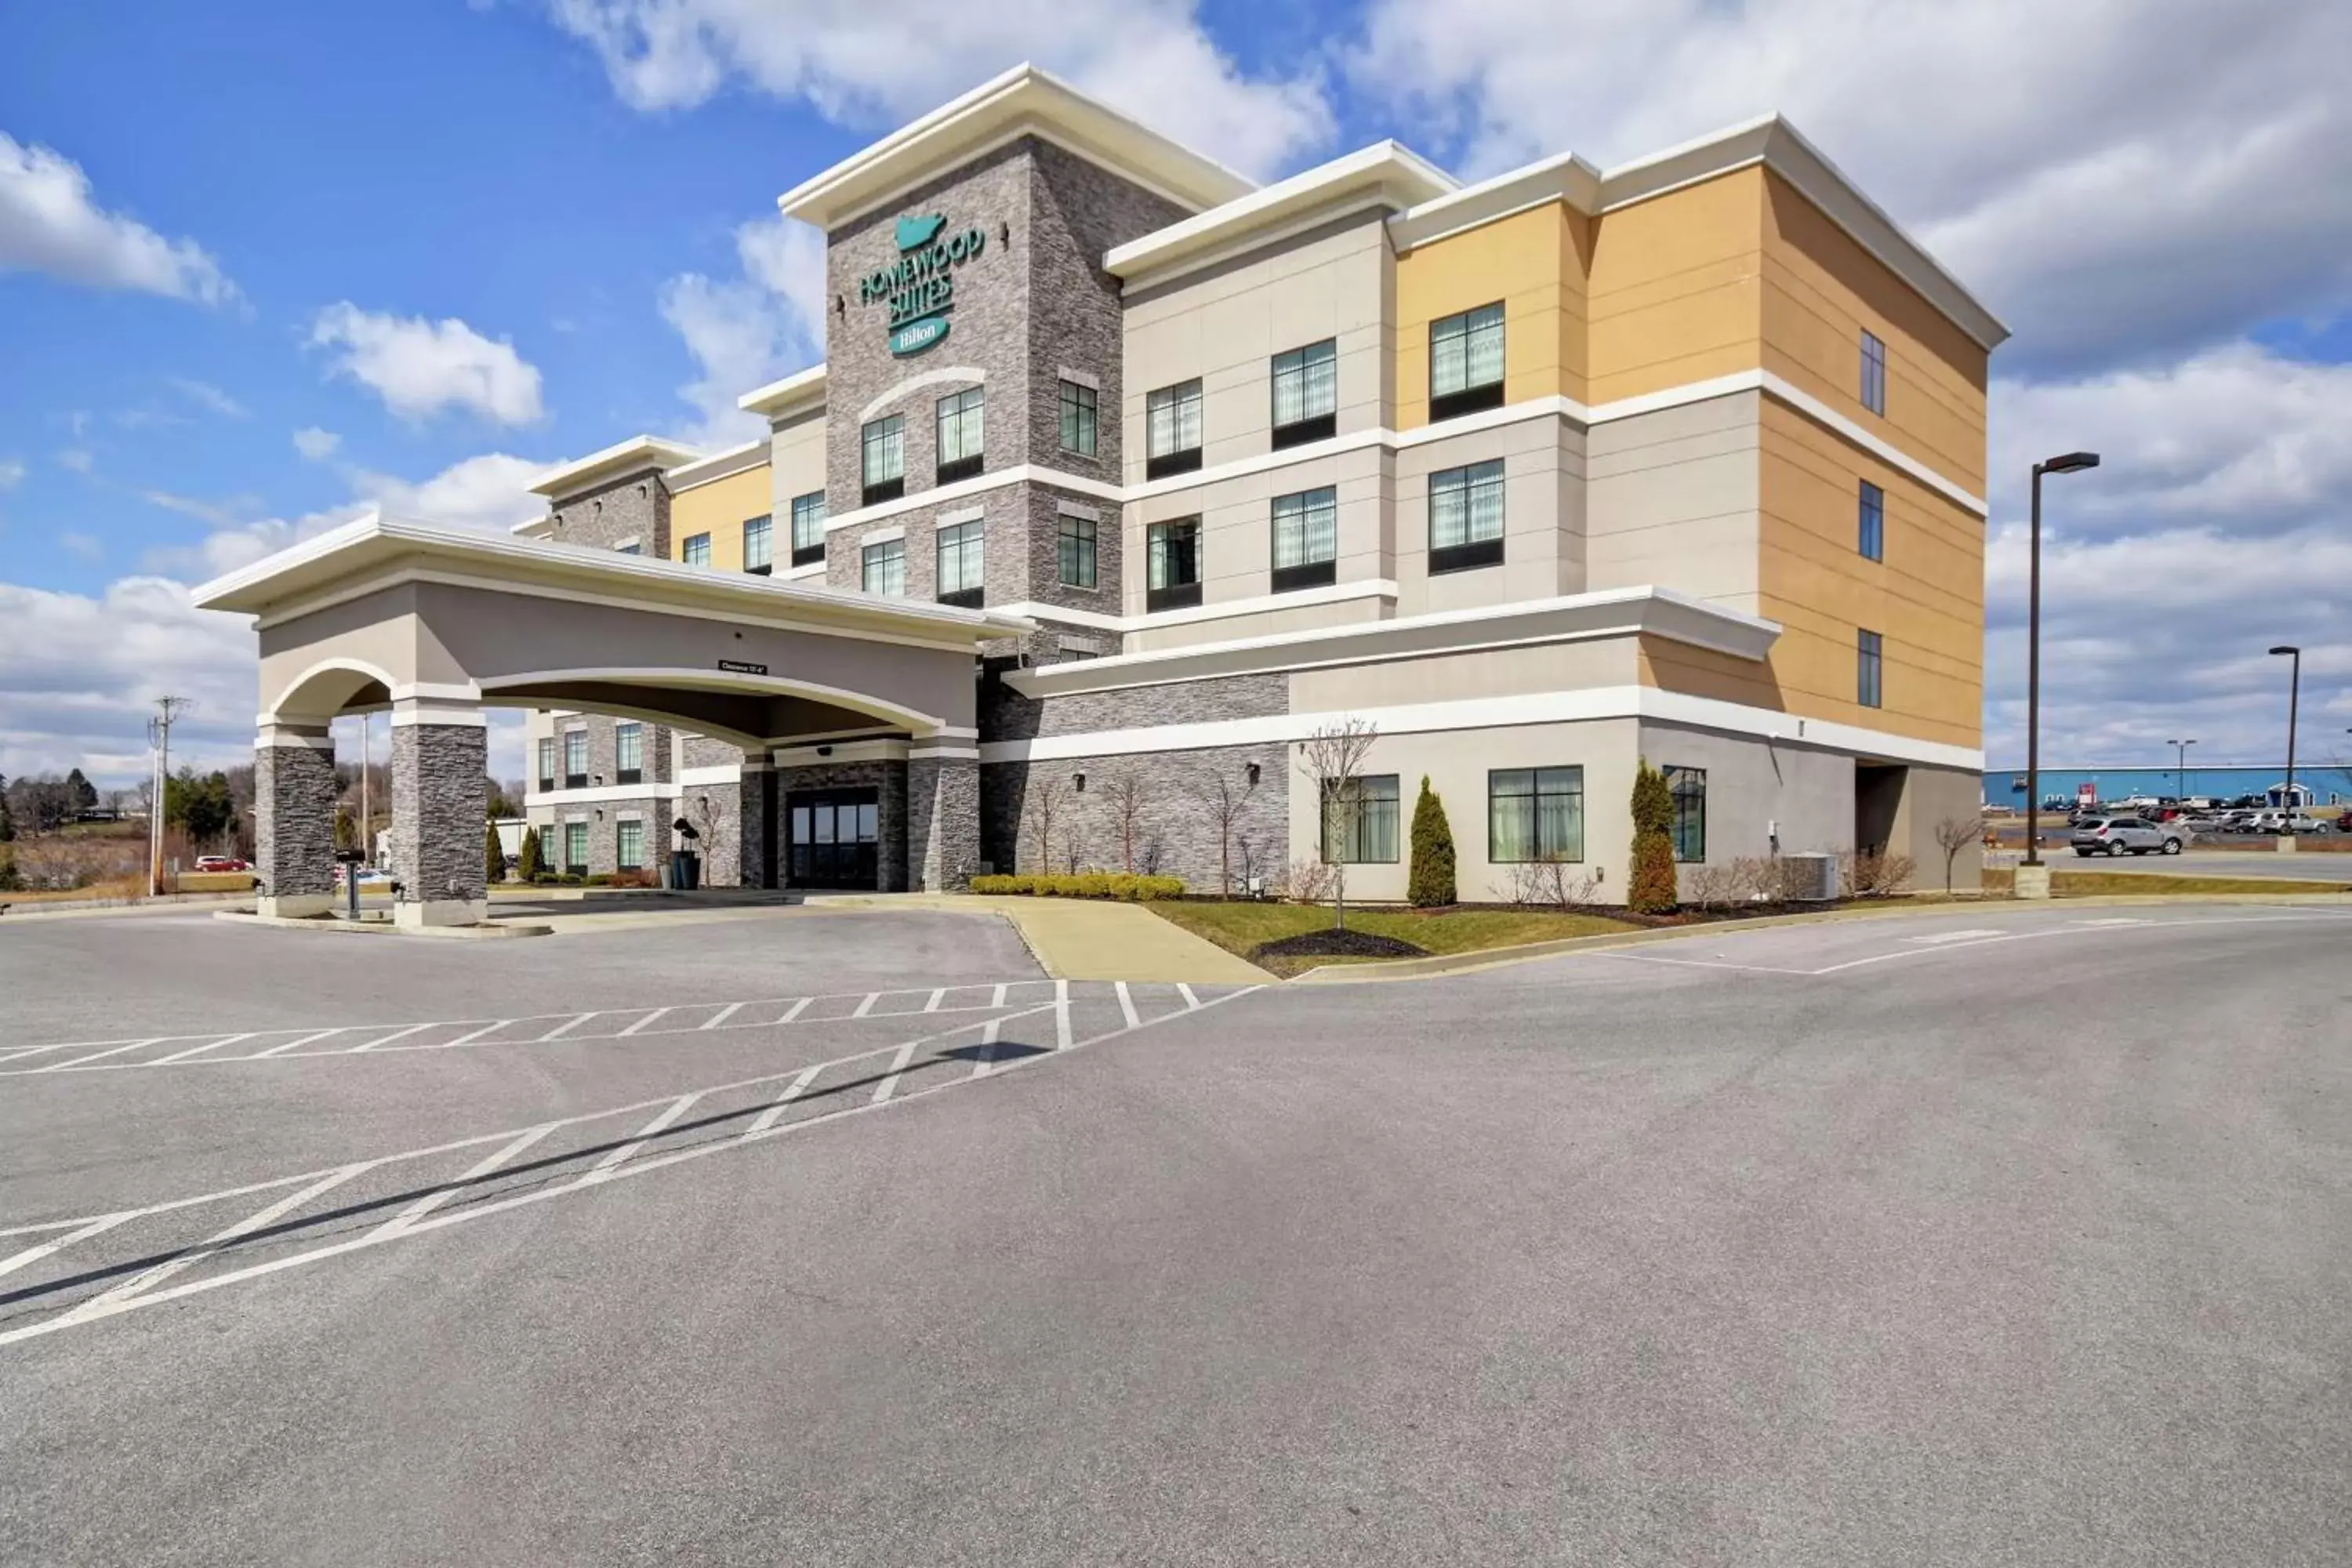 Property Building in Homewood Suites By Hilton Dubois, Pa